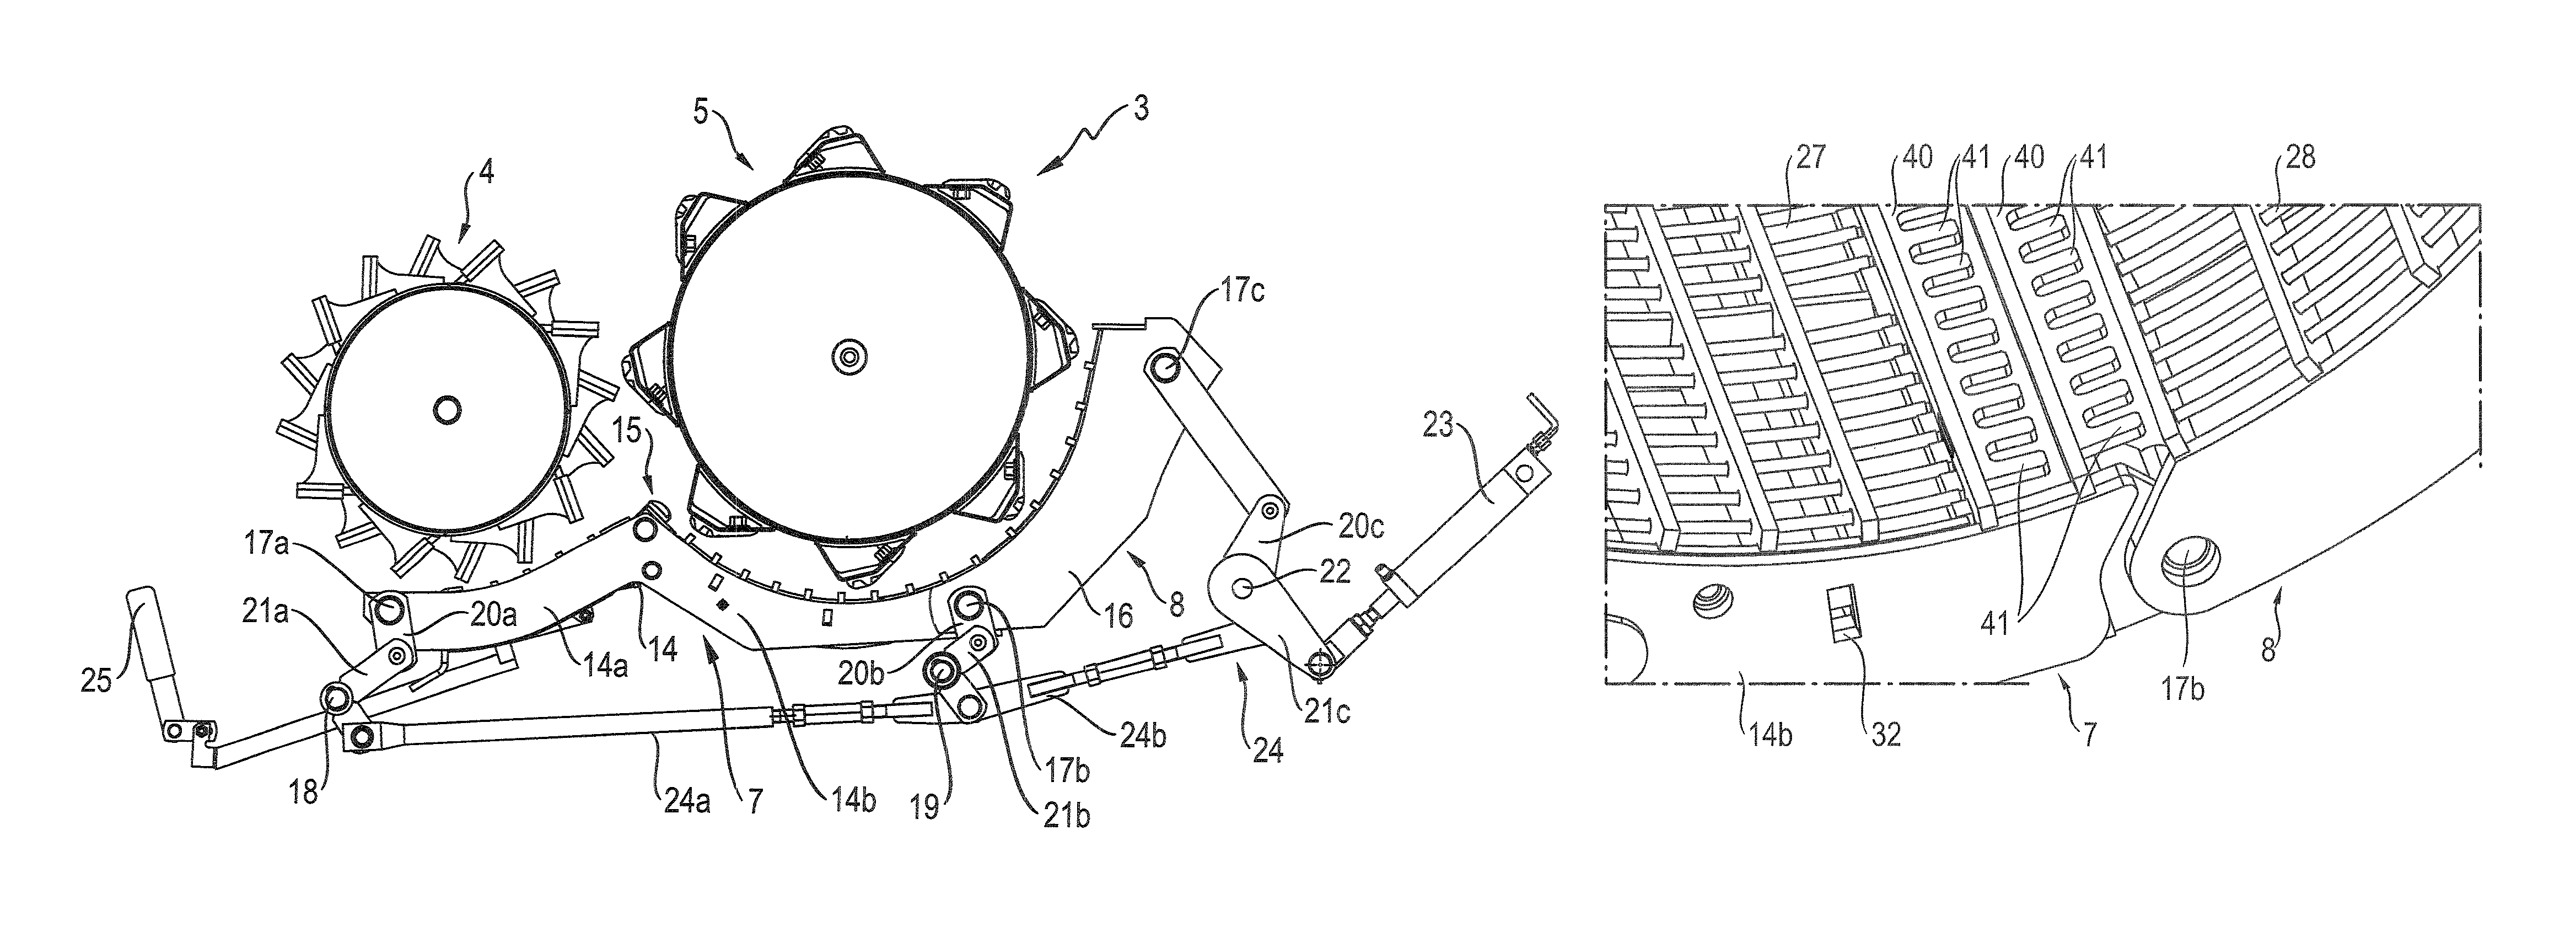 Threshing mechanism with swivellable concaves